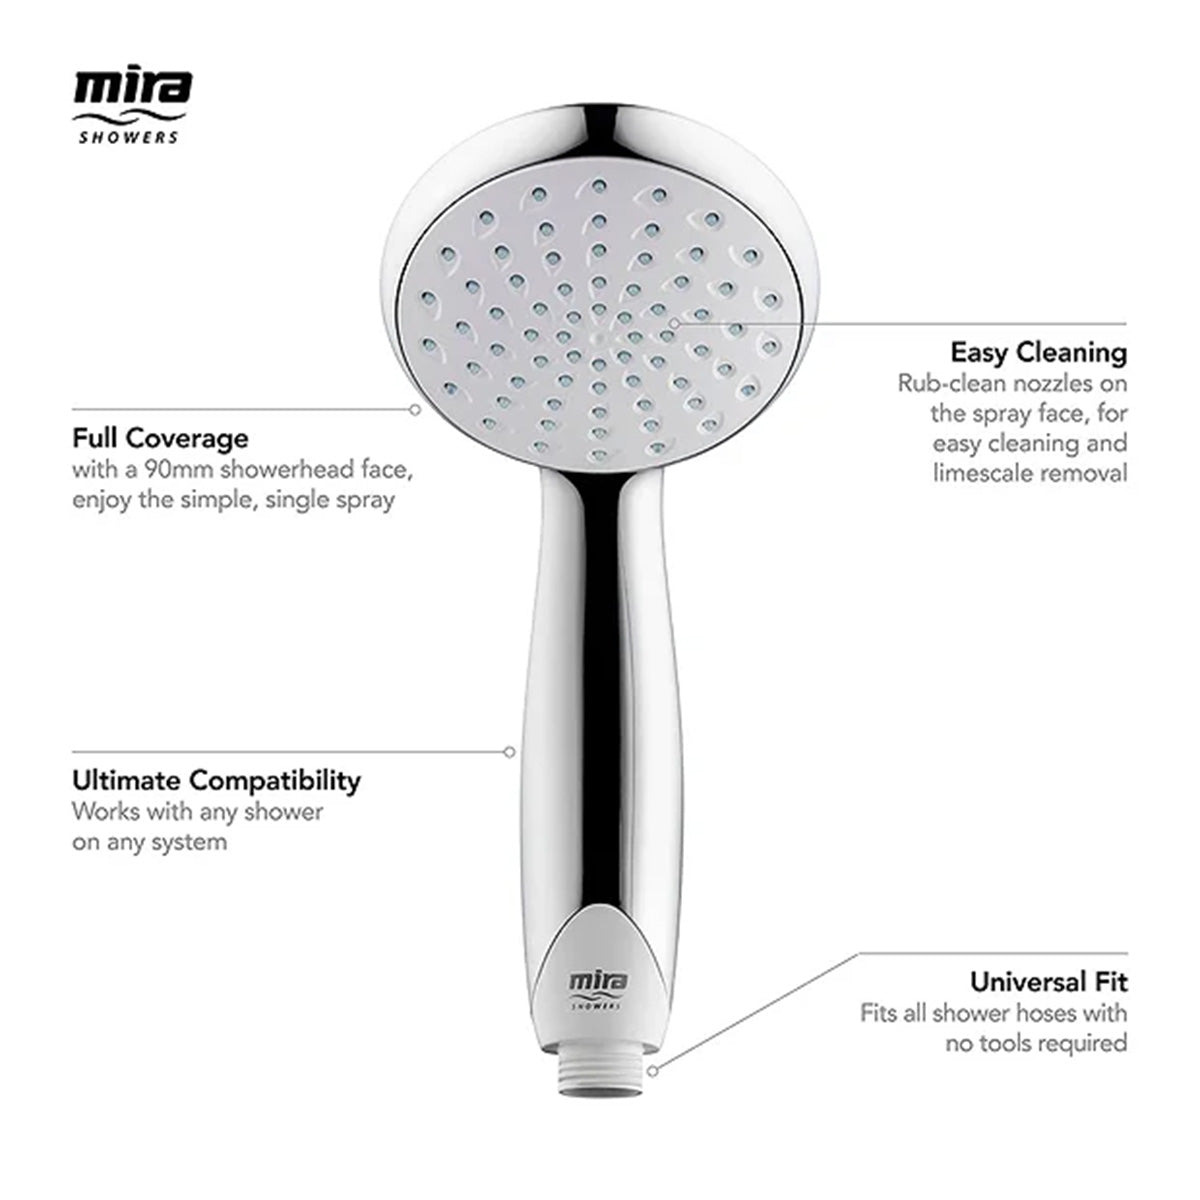 mira vigour dual outlet thermostatic shower infographic